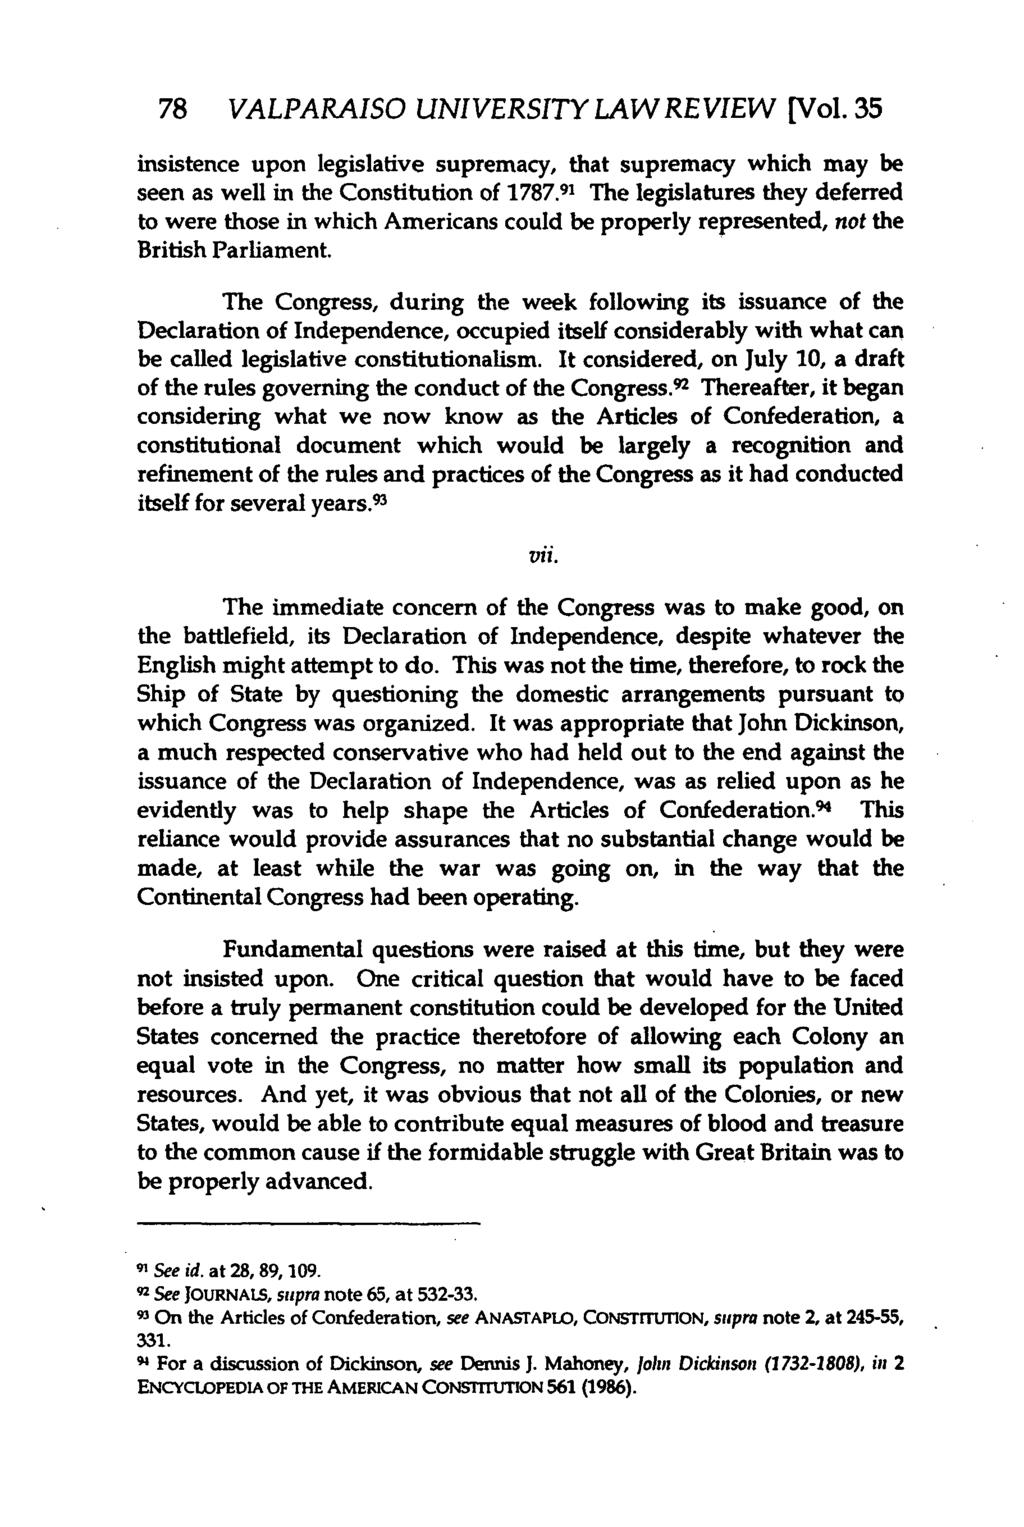 78 VALPARAISO UNIVERSITY LAW REVIEW [Vol. 35 insistence upon legislative supremacy, that supremacy which may be seen as well in the Constitution of 1787.